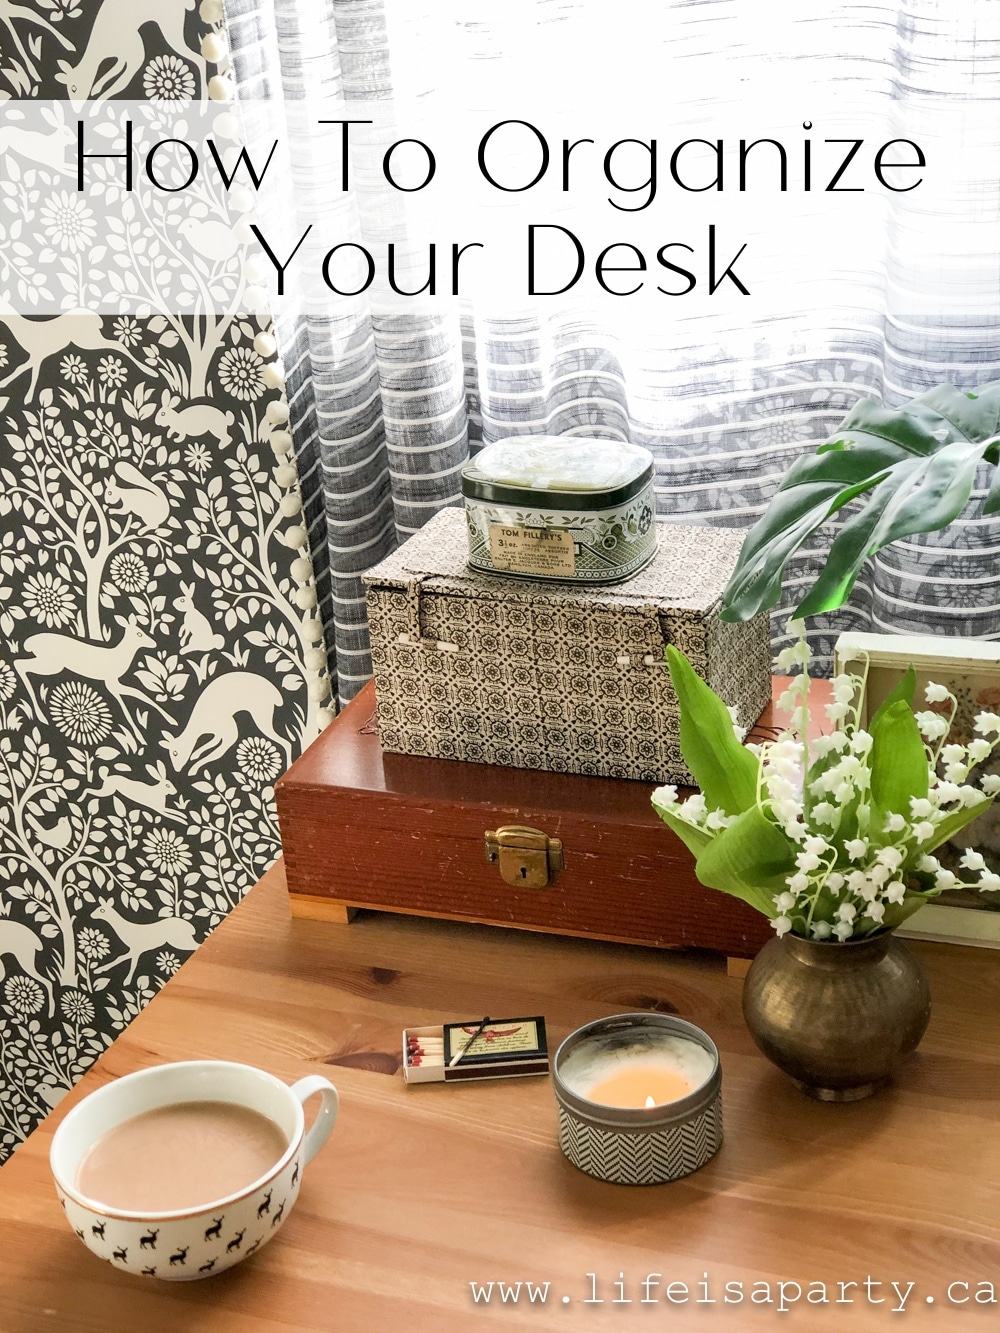 How To Organize Your Desk: get your office and craft room organized with unlikely and beautiful containers from the thrift store.